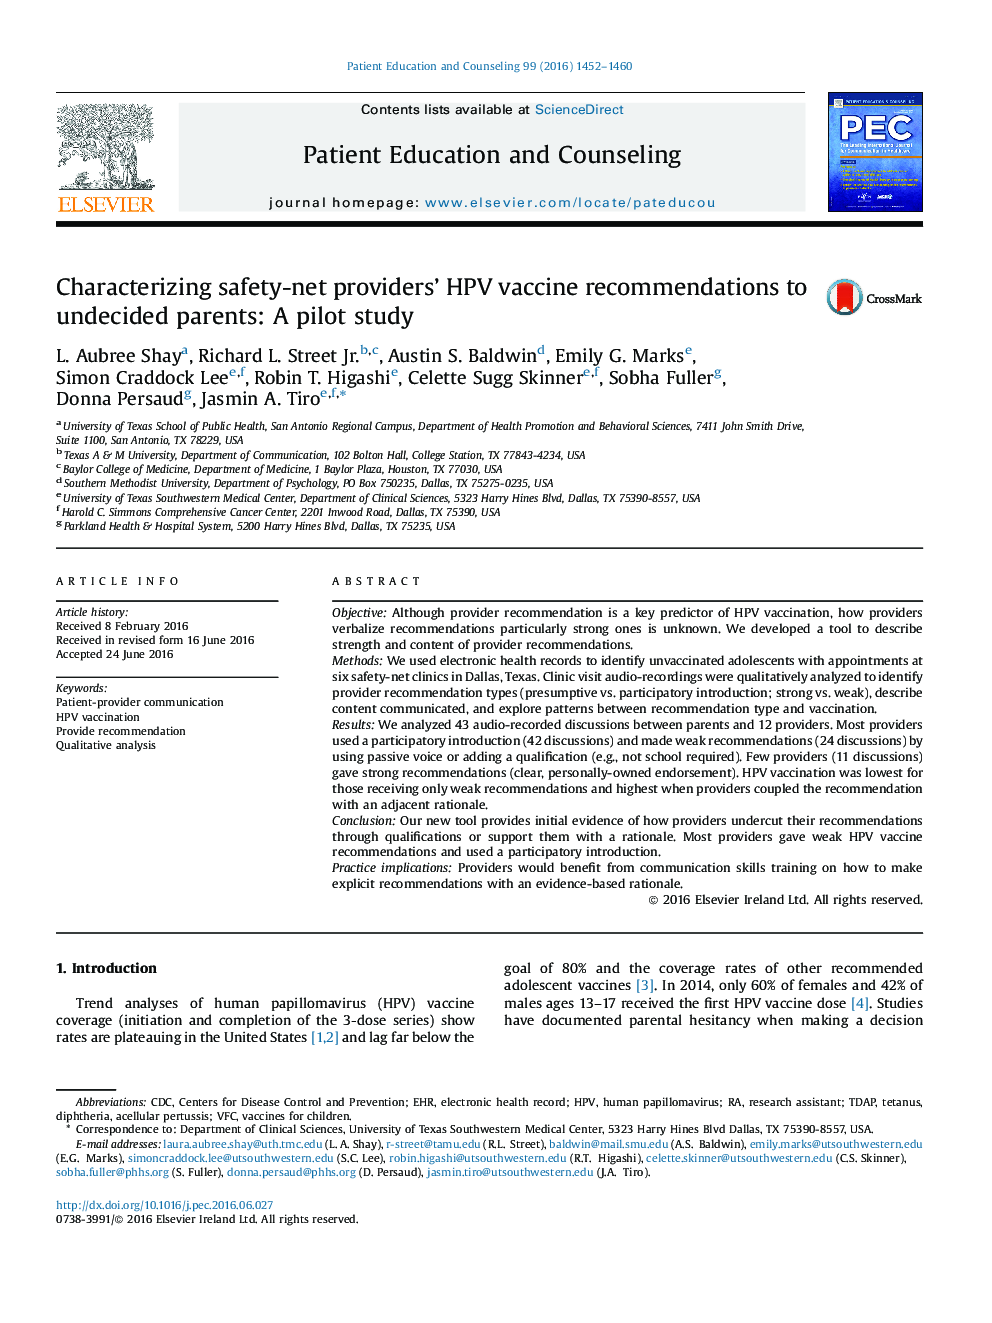 Characterizing safety-net providers’ HPV vaccine recommendations to undecided parents: A pilot study